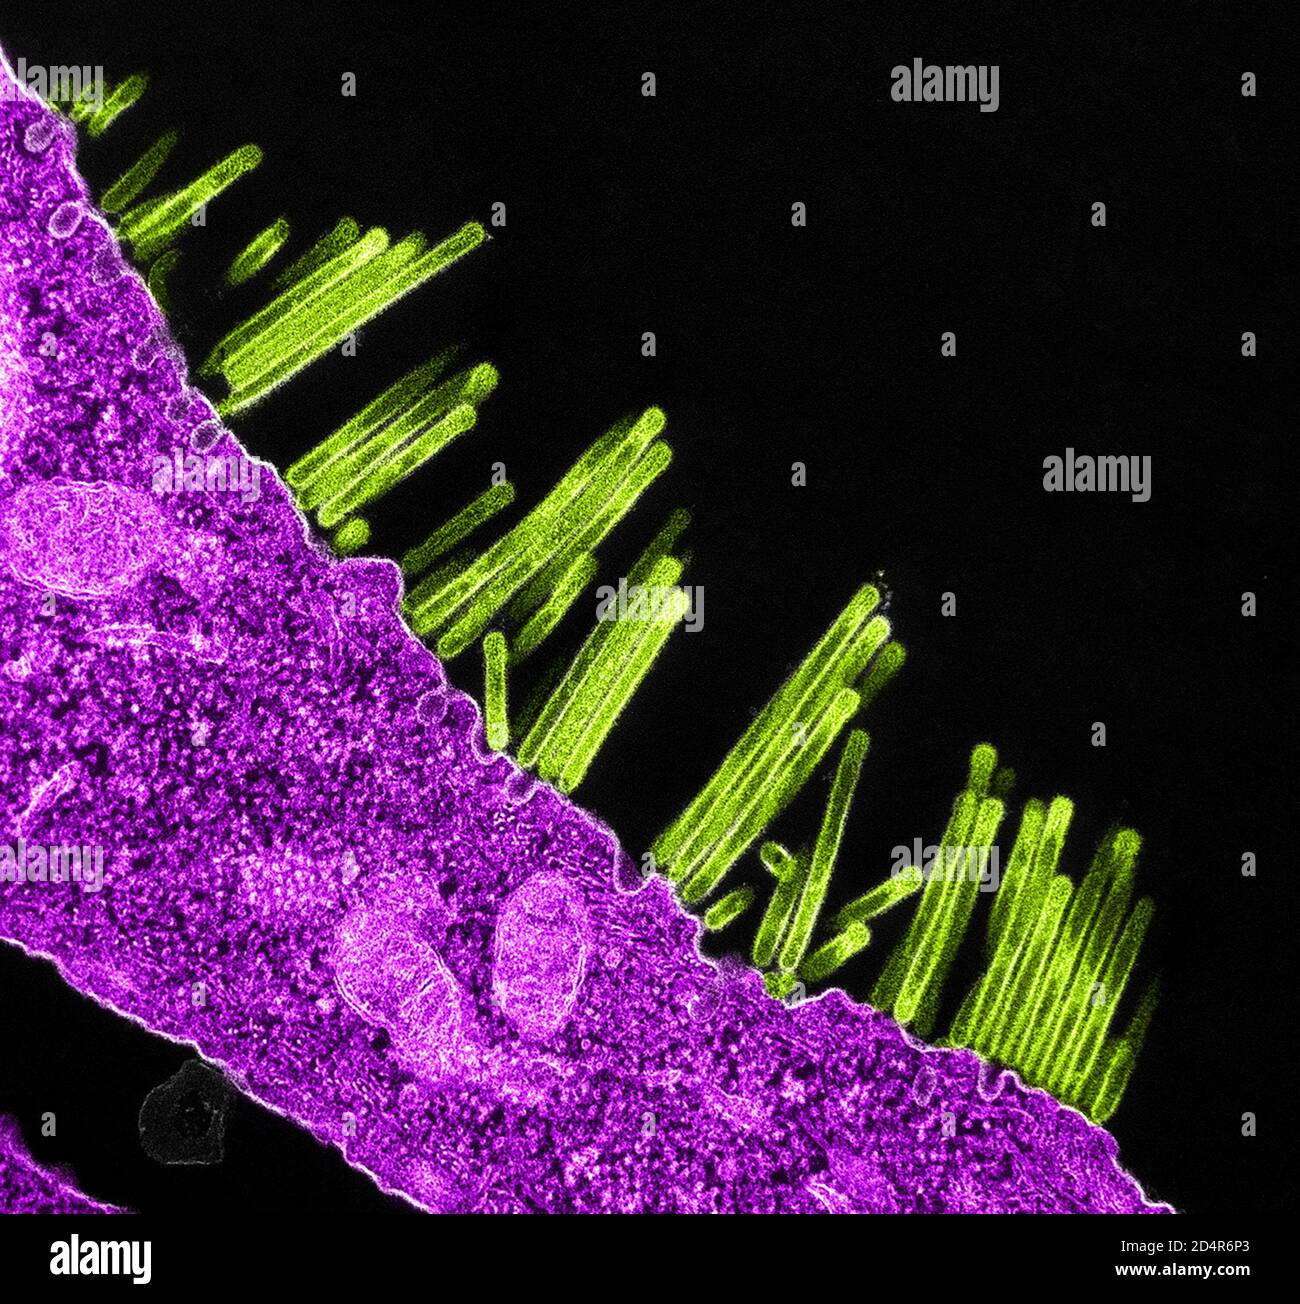 Swine Flu Virus Particles Colorized transmission electron micrograph of SW31 (swine strain) influenza virus particles (green) budding from the surface Stock Photo